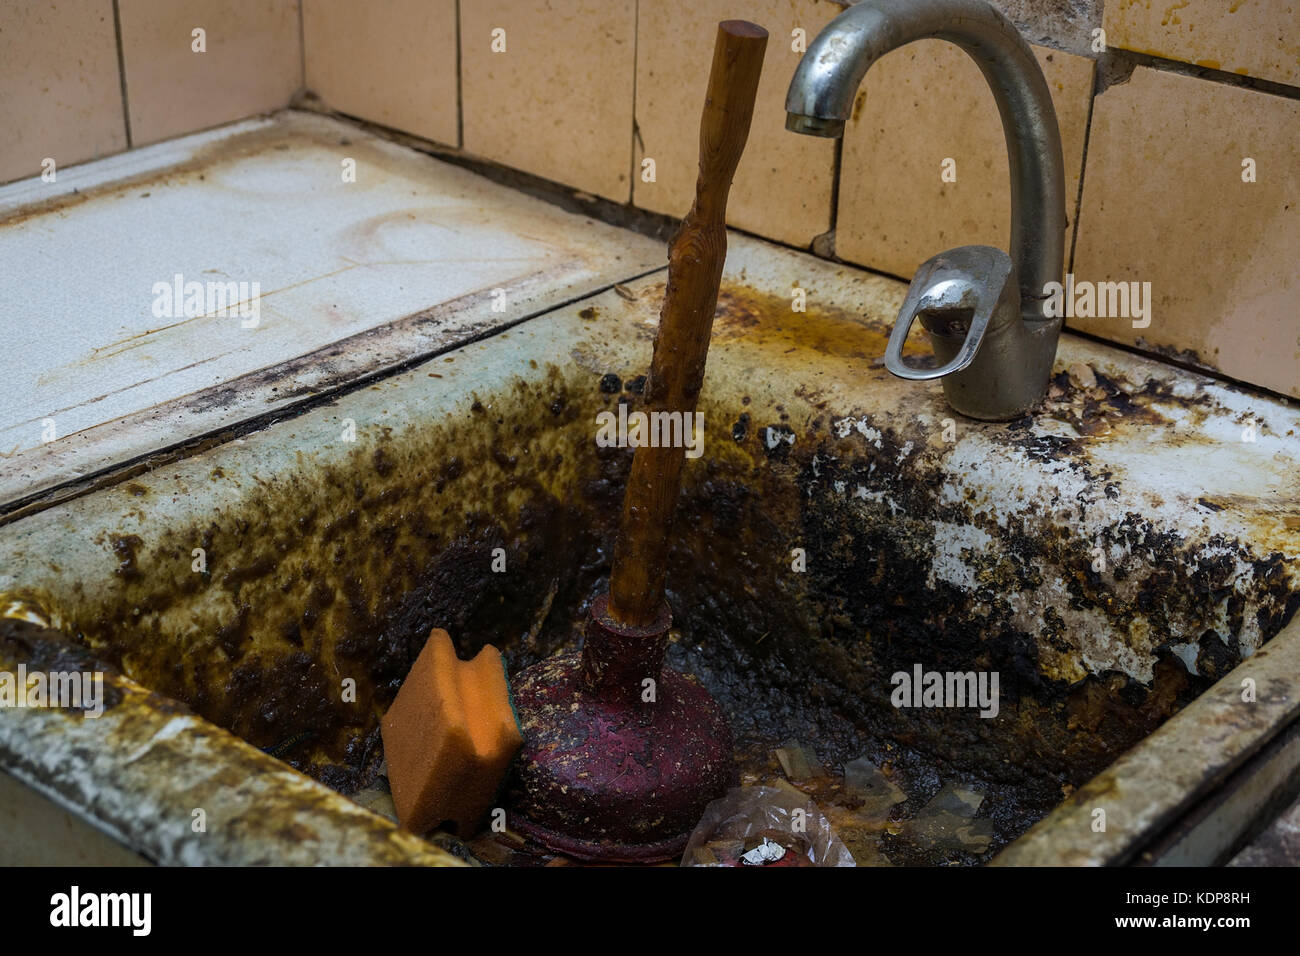 Old Clogged A Sink In The Rust The Old Kitchen Clogged